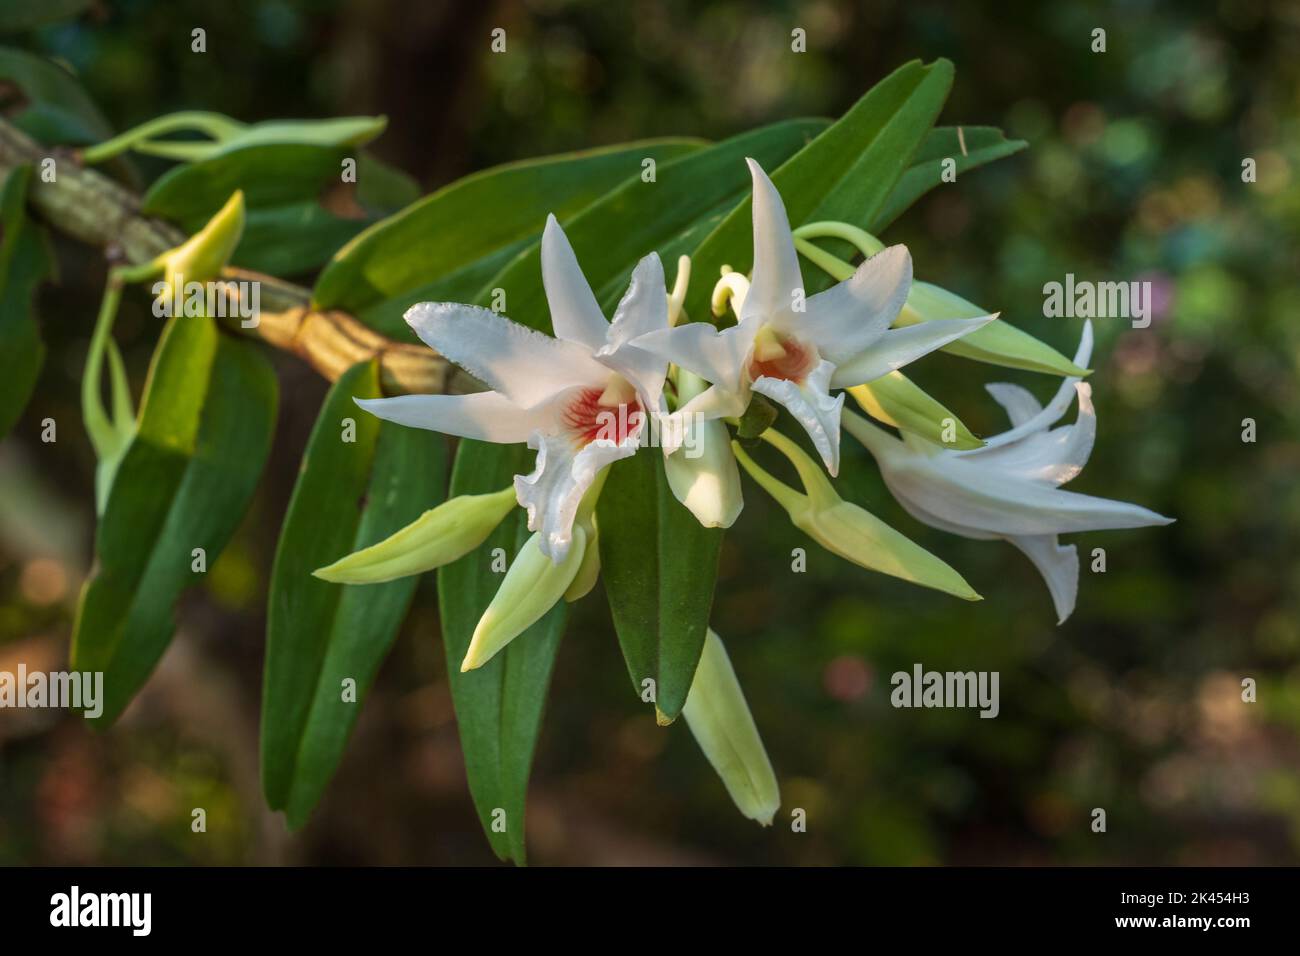 Closeup view of delicate white and orange dendrobium draconis epiphytic orchid species blooming outdoors on natural background Stock Photo